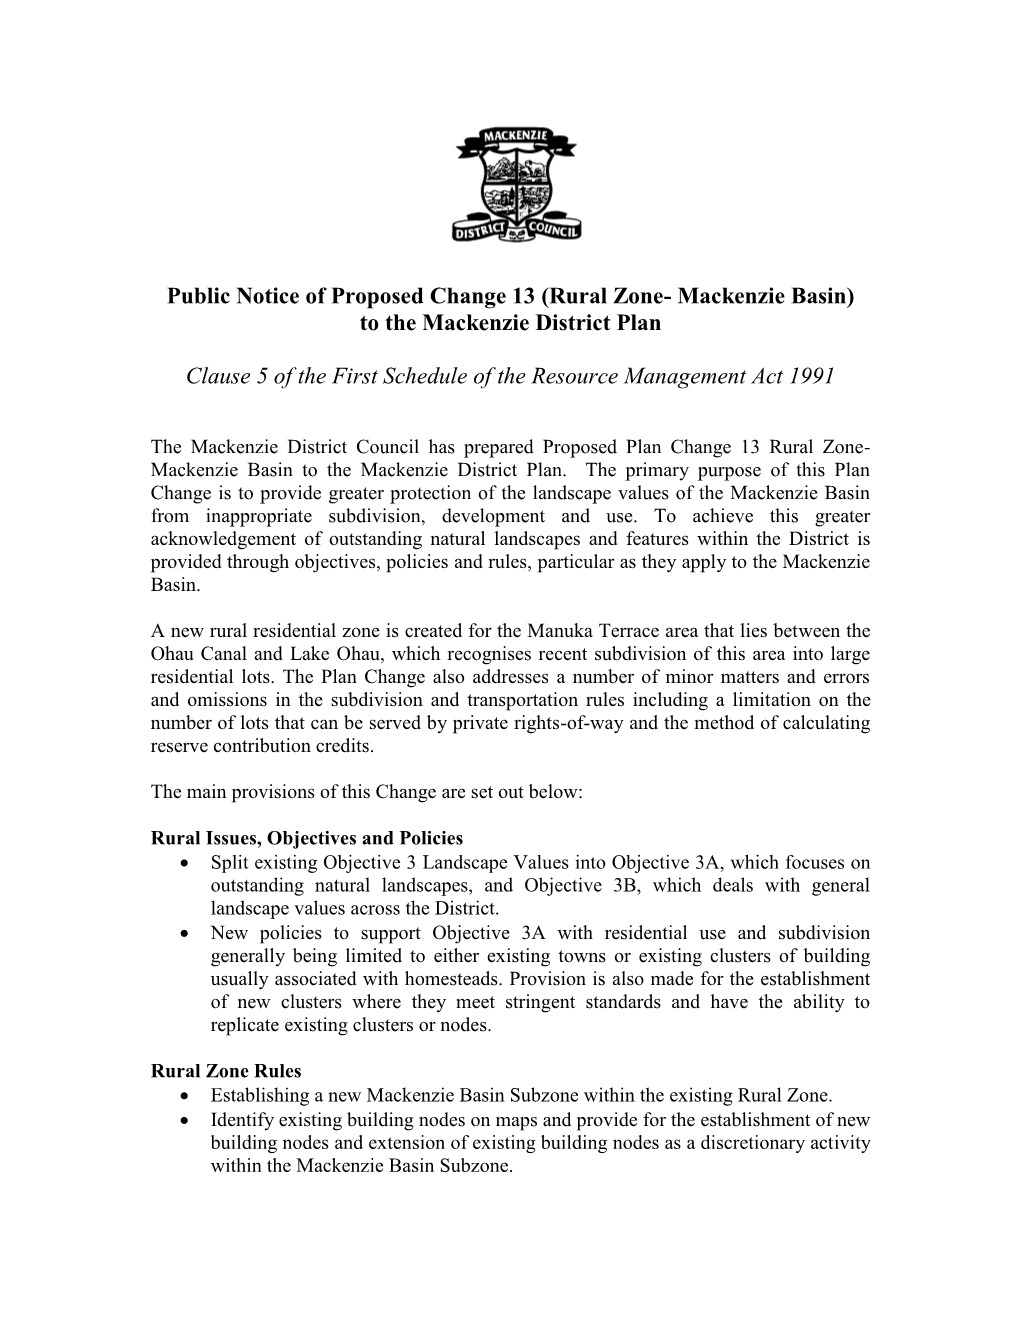 Public Notice of Proposed Change 13 (Rural Zone- Mackenzie Basin) to the Mackenzie District Plan